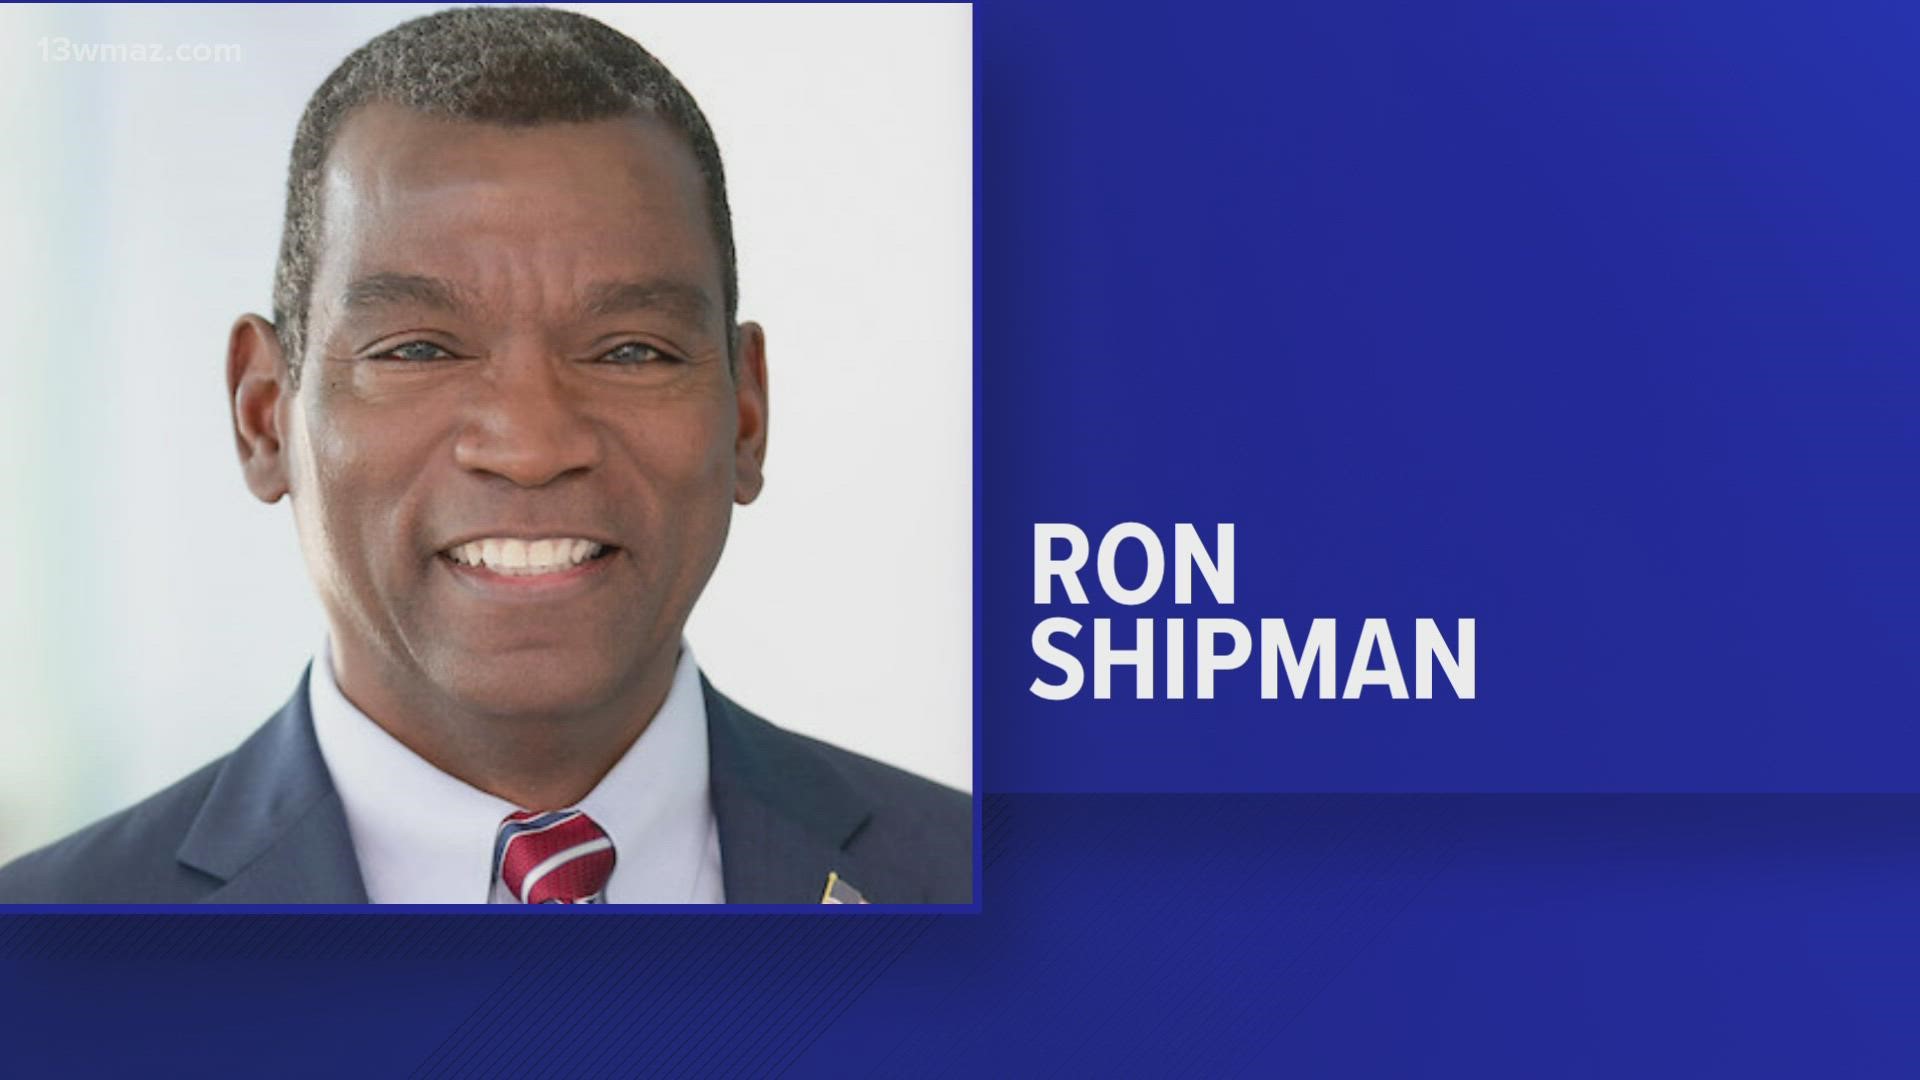 Ron Shipman named interim executive director candidate of Macon Water Authority and would be first minority to hold role